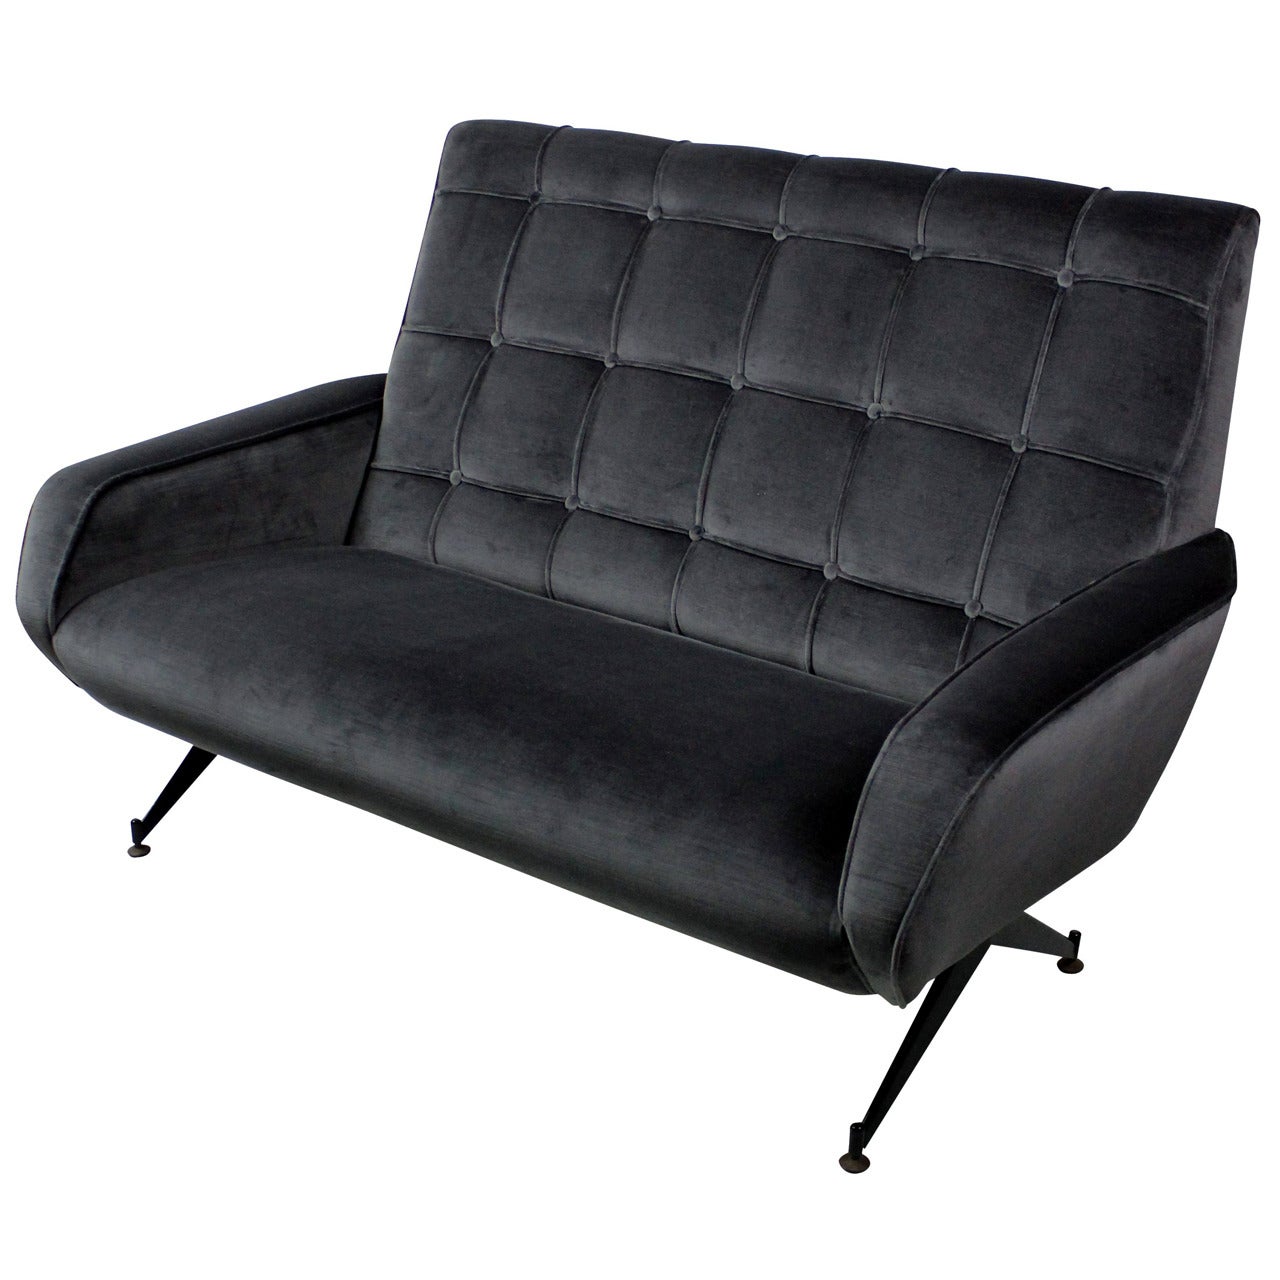 An Italian two-seat settee in the style of Arflex, with detailed buttoned back and angular shape, supported on black enameled legs. Newly upholstered in a ribbed blue or grey velvet.